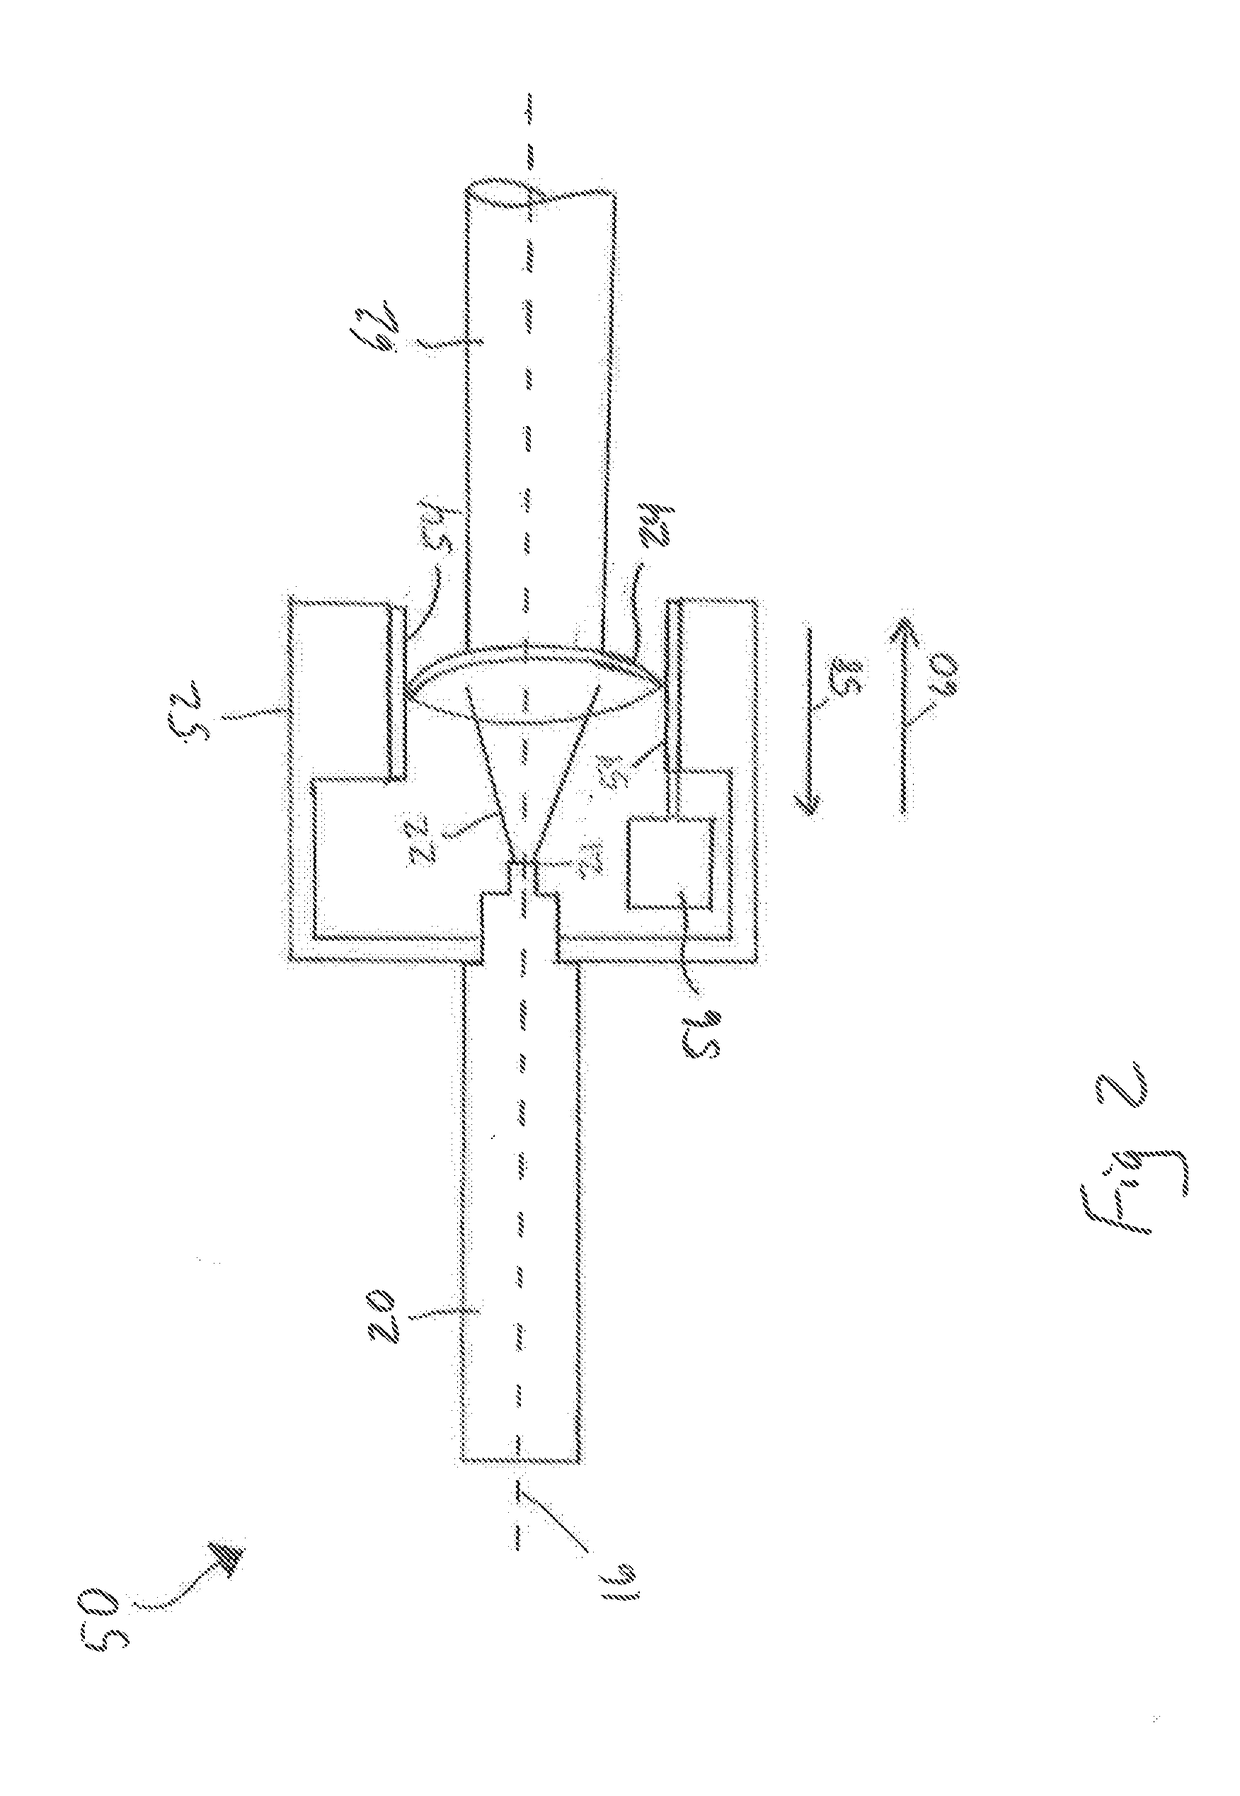 Laser Based Visual Effect Device and System